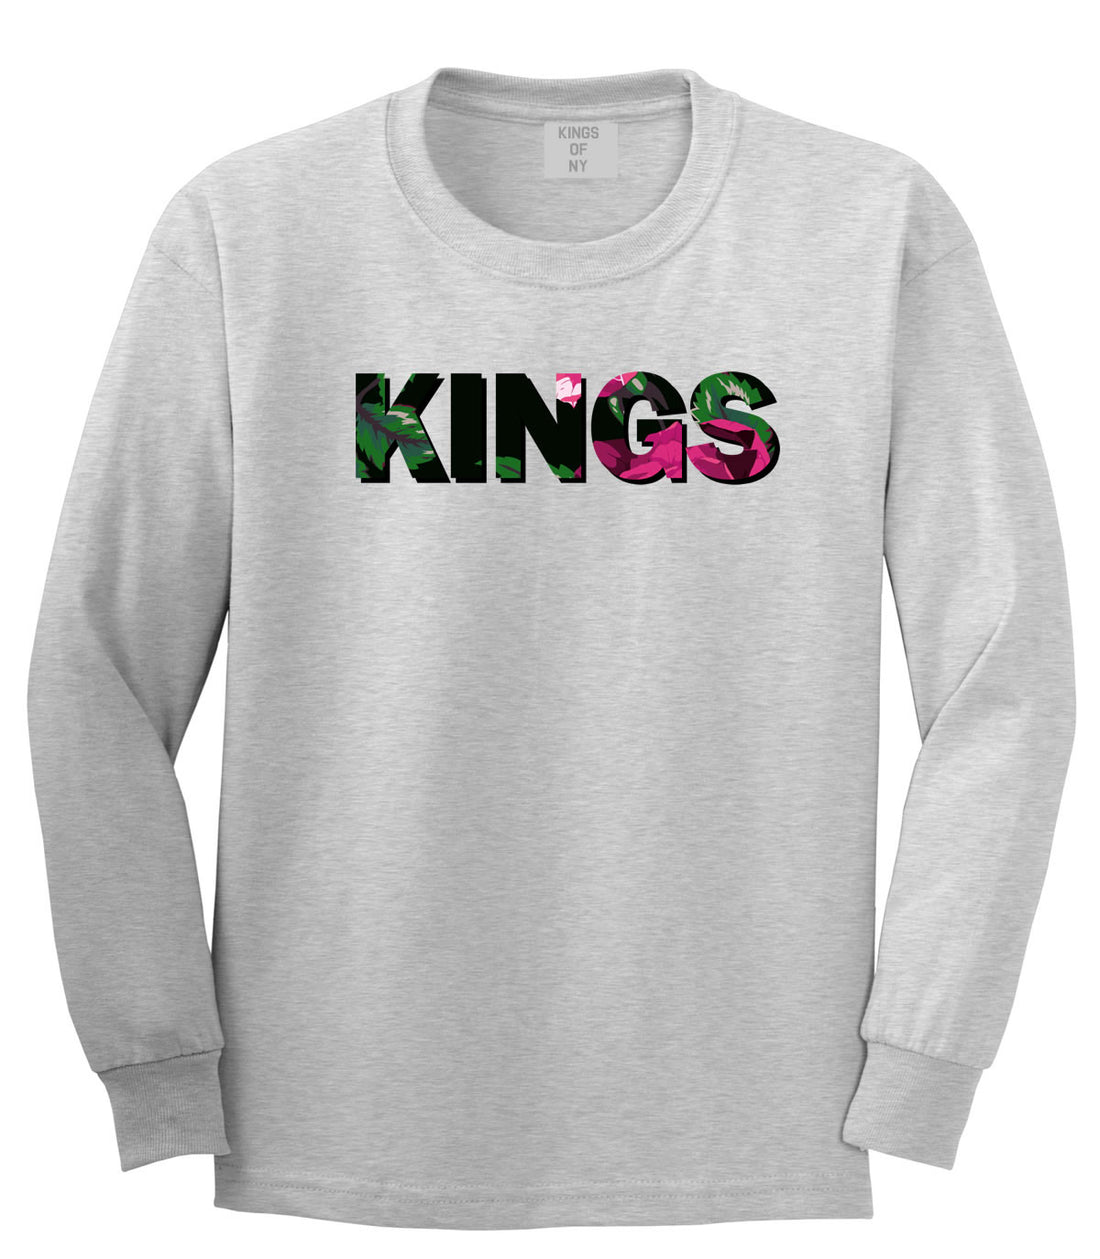 Kings Floral Print Pattern Long Sleeve T-Shirt in Grey by Kings Of NY